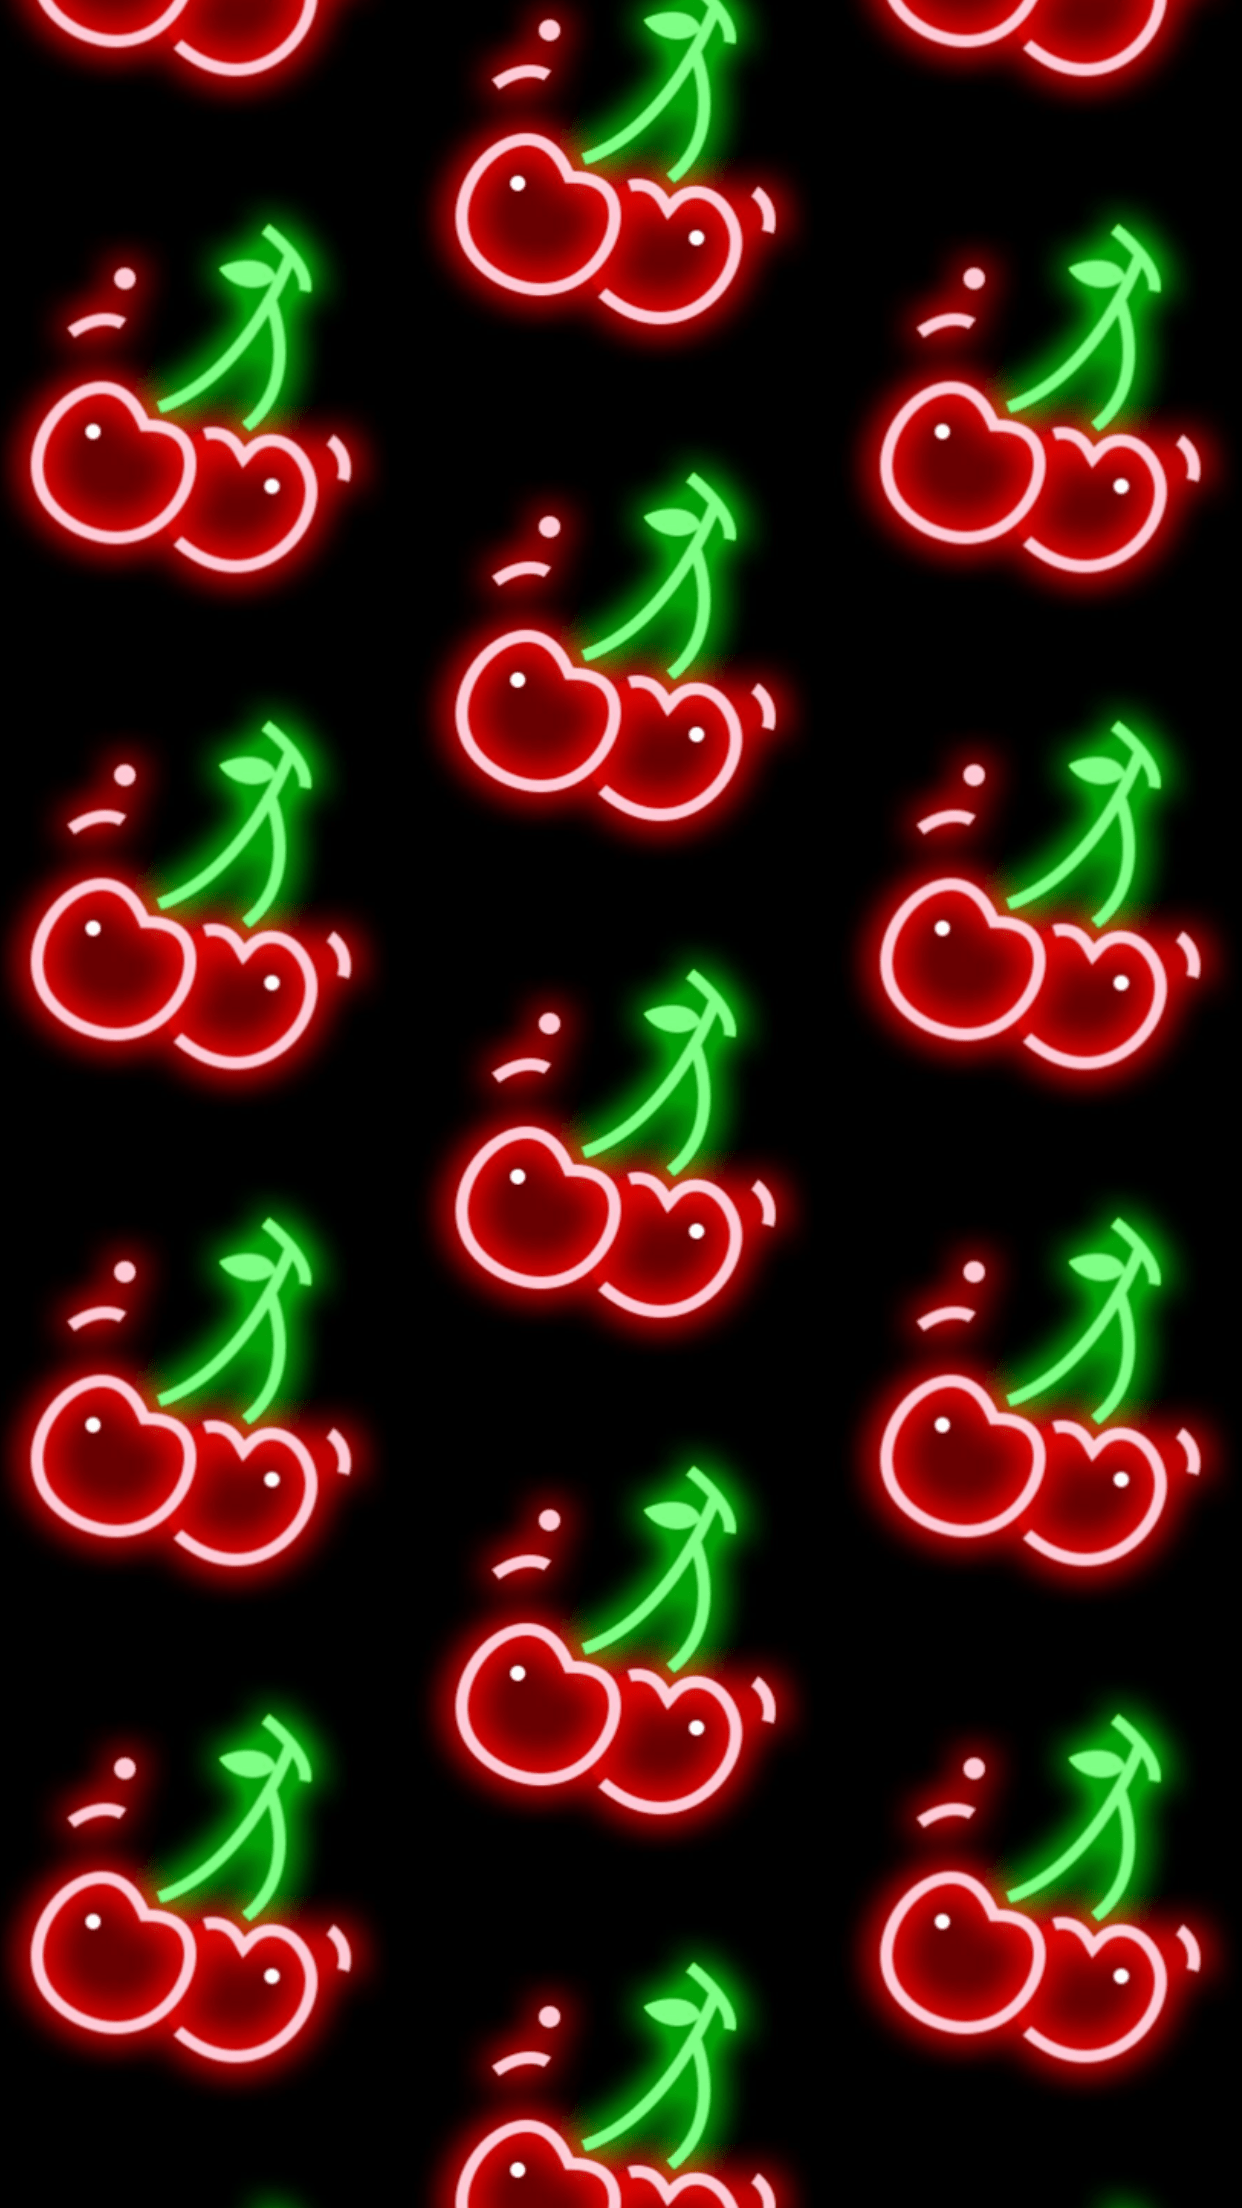 A pattern of neon cherries on a black background - Cherry